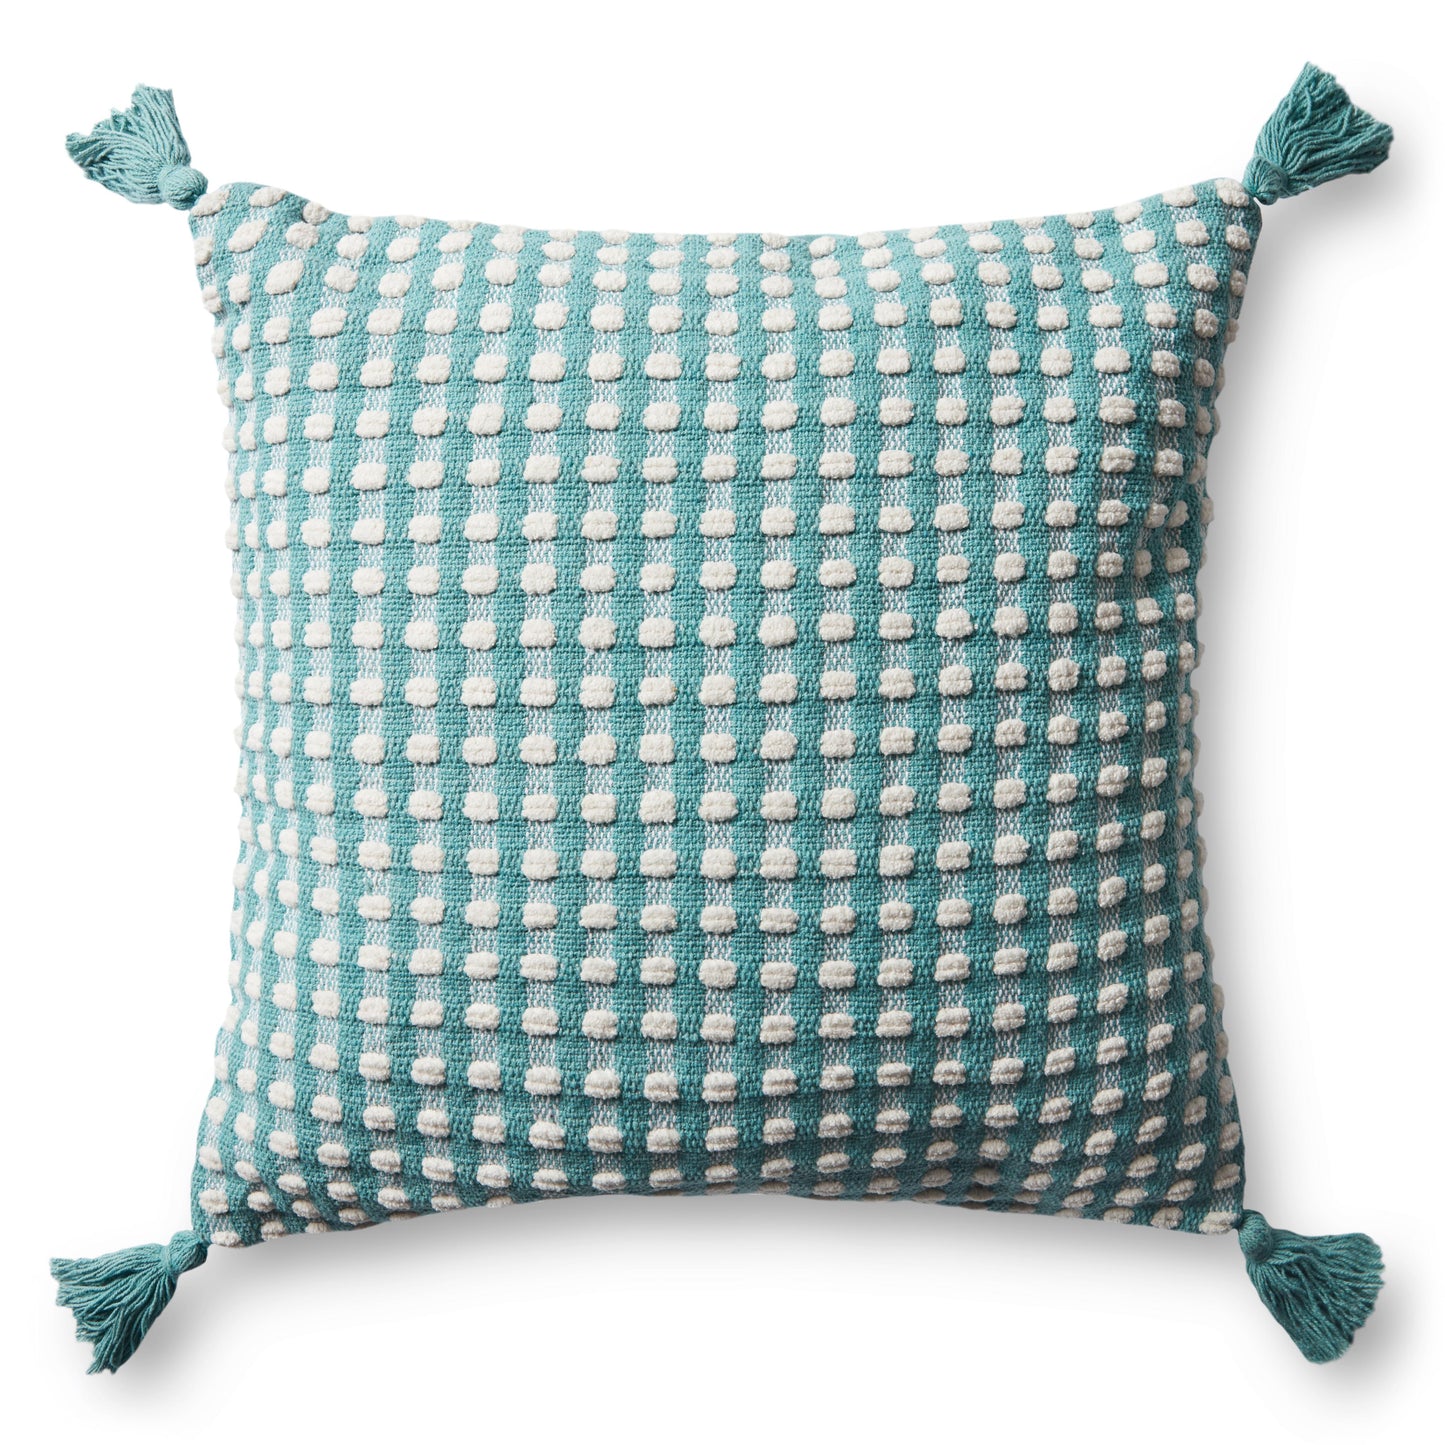 PILLOWS PED0016 Cotton Indoor Pillow from ED Ellen DeGeneres Crafted by Loloi